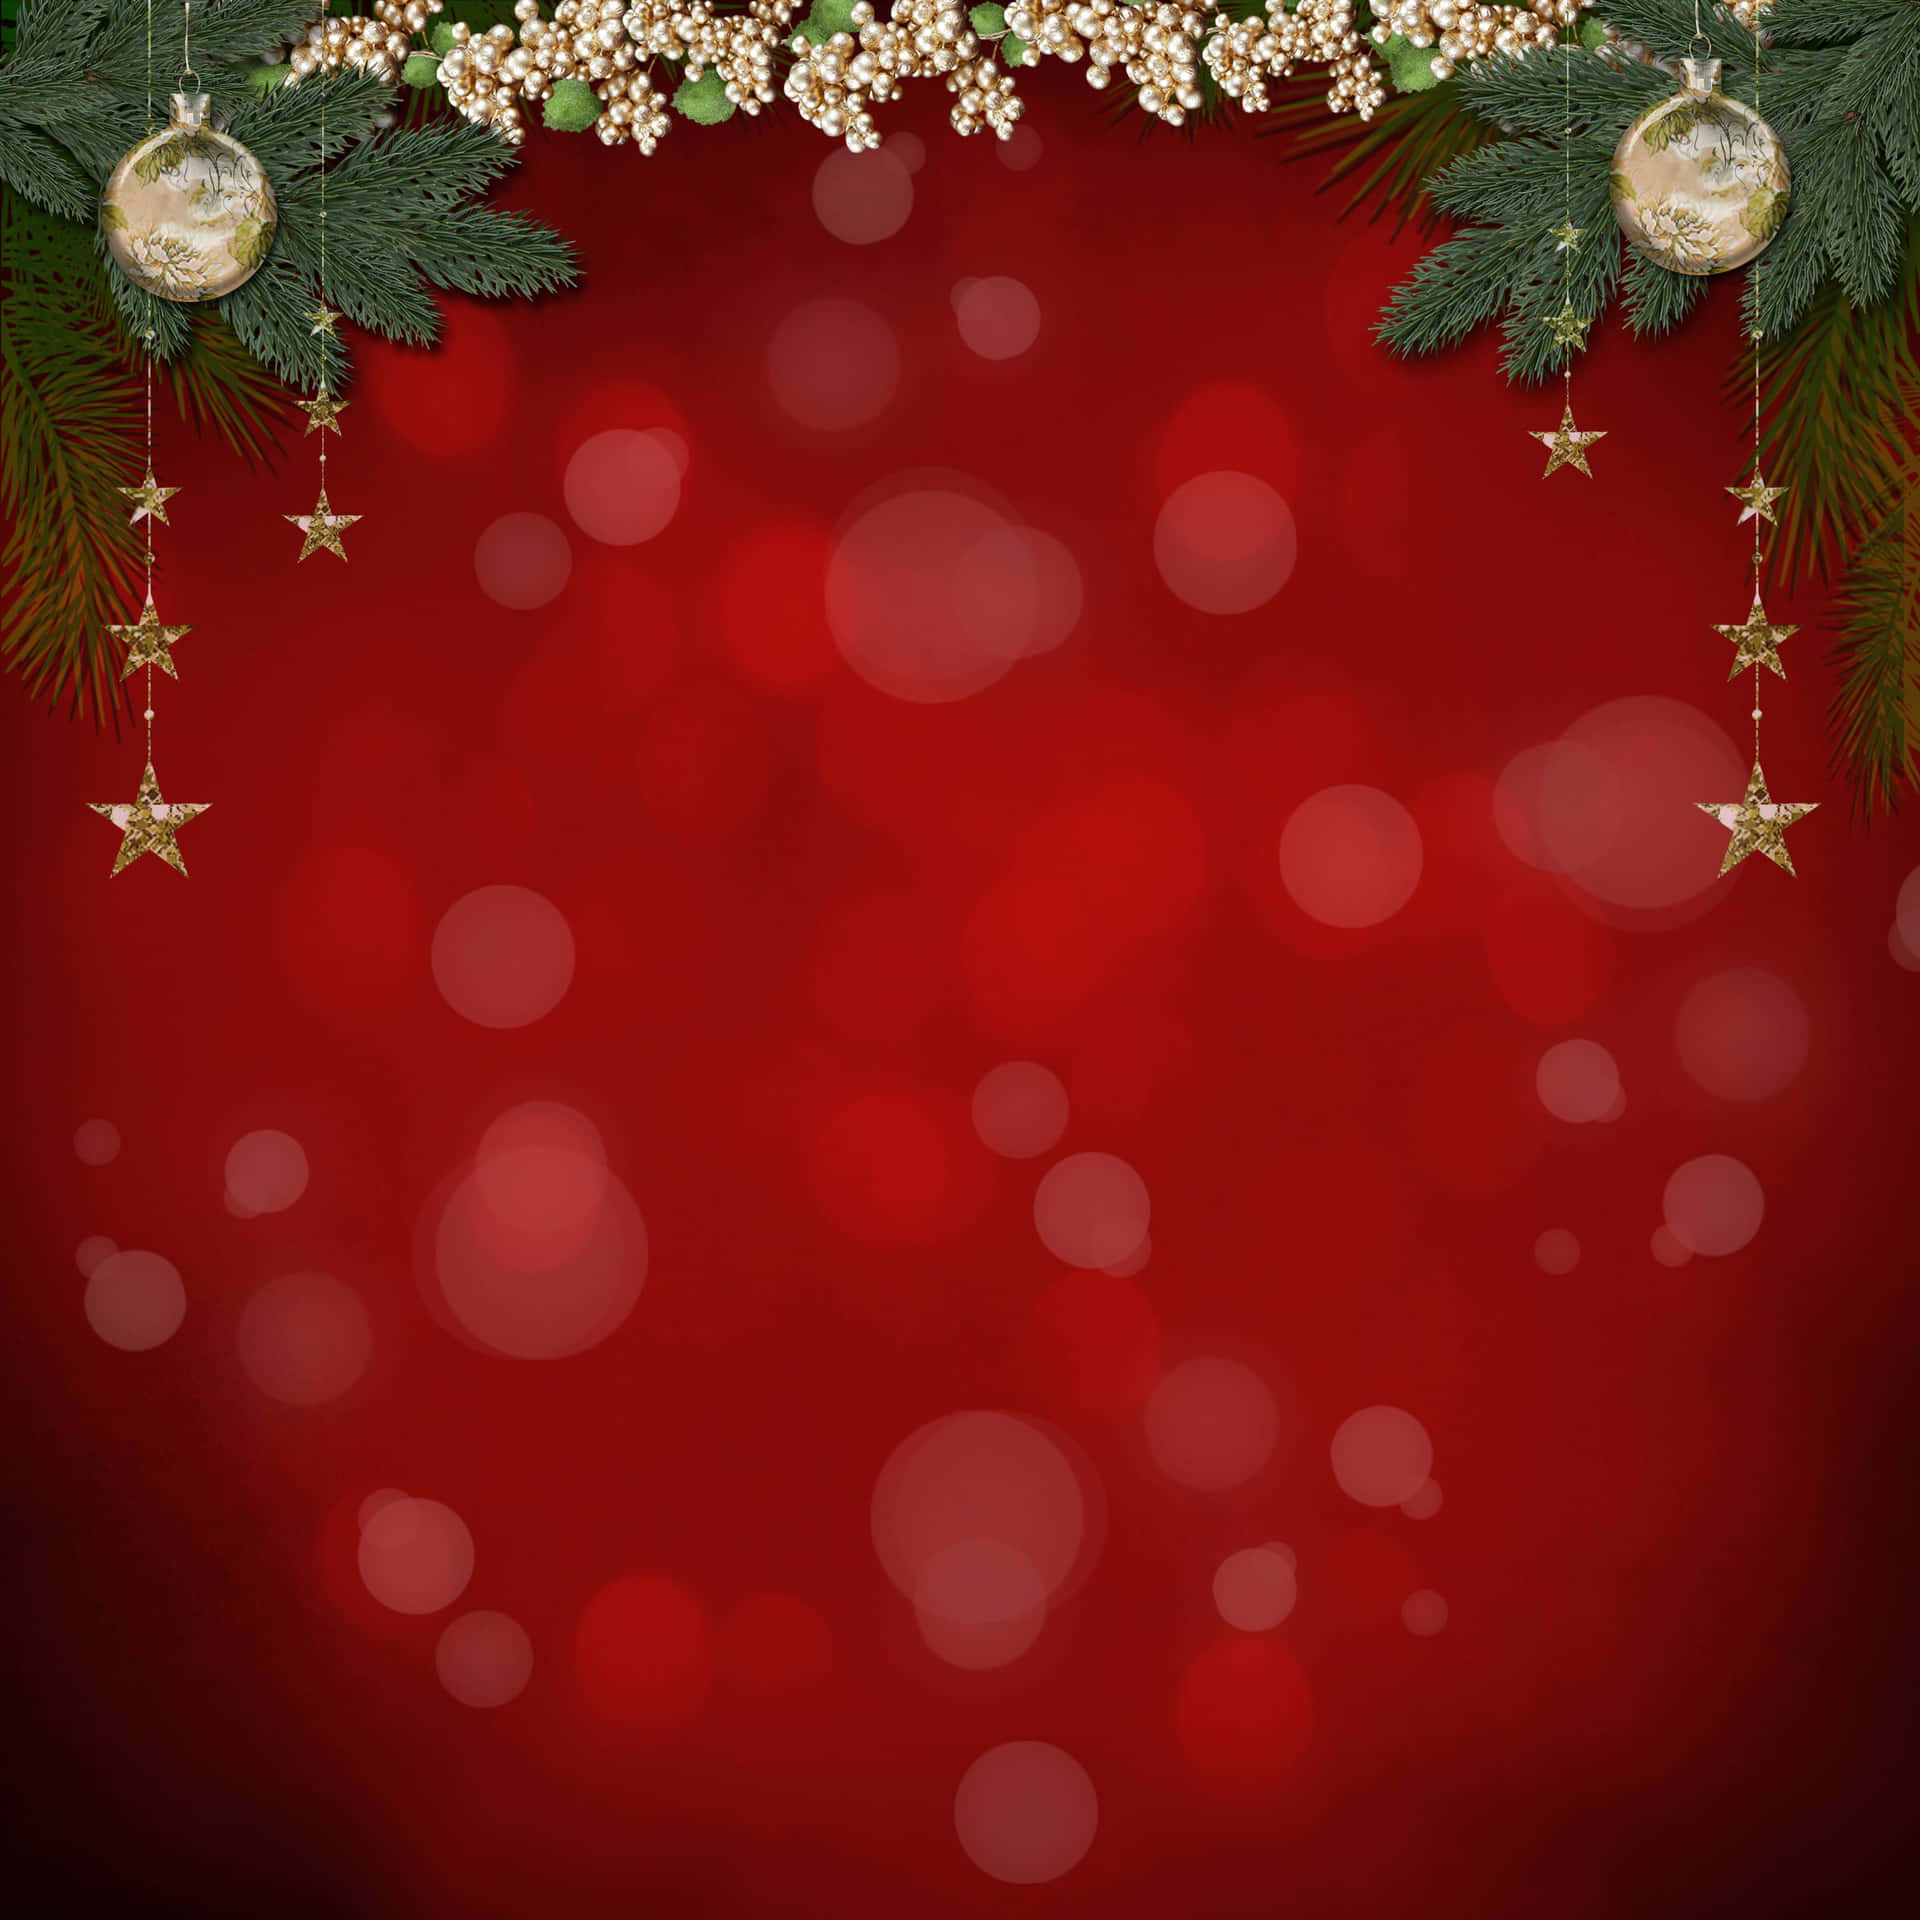 Celebrate the Holidays with Red and Green Wallpaper